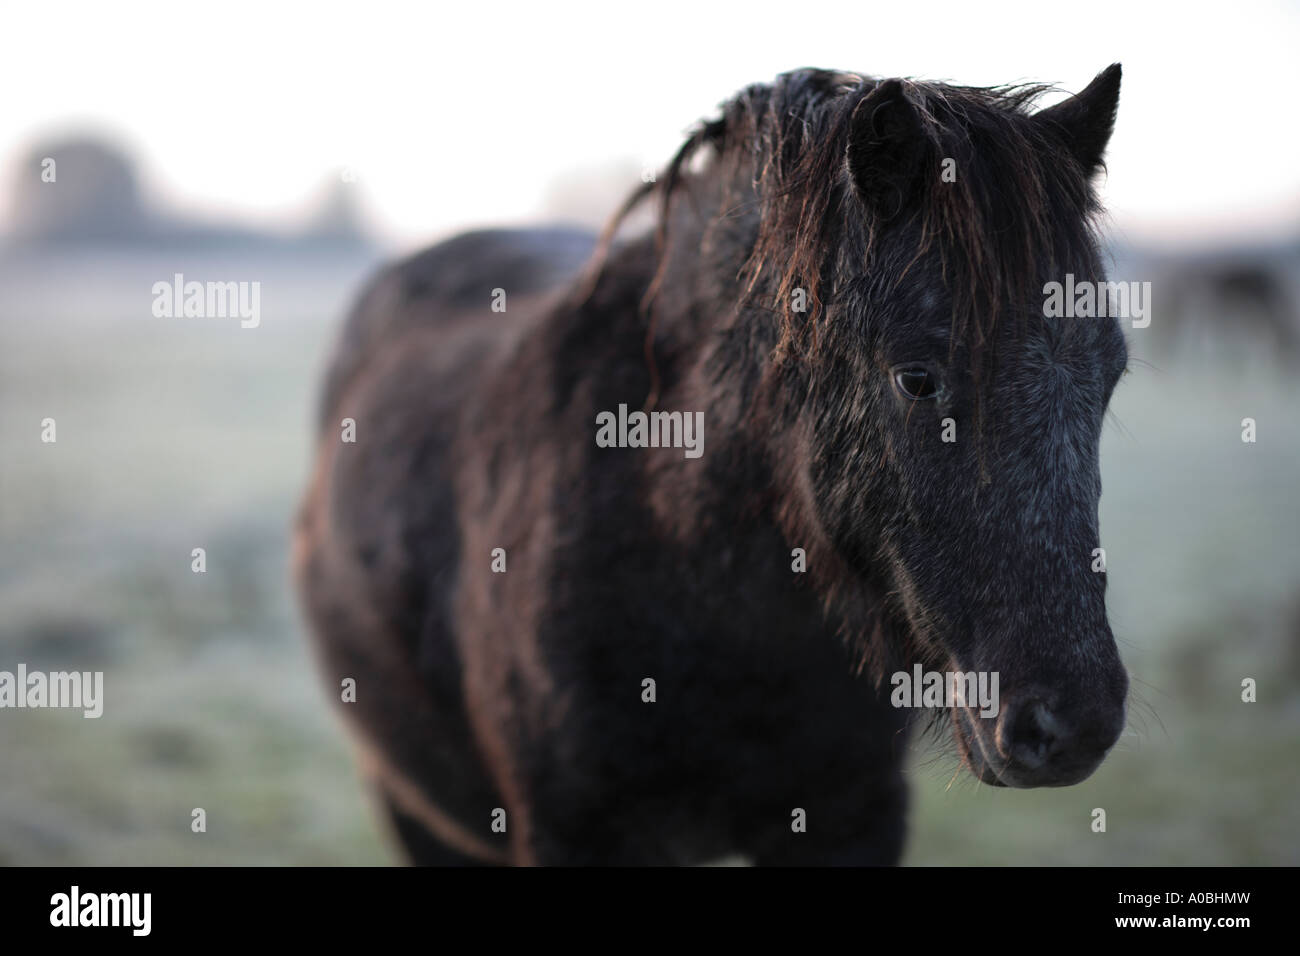 Junges Pony, Port Wiese, North Oxford, UK Stockfoto